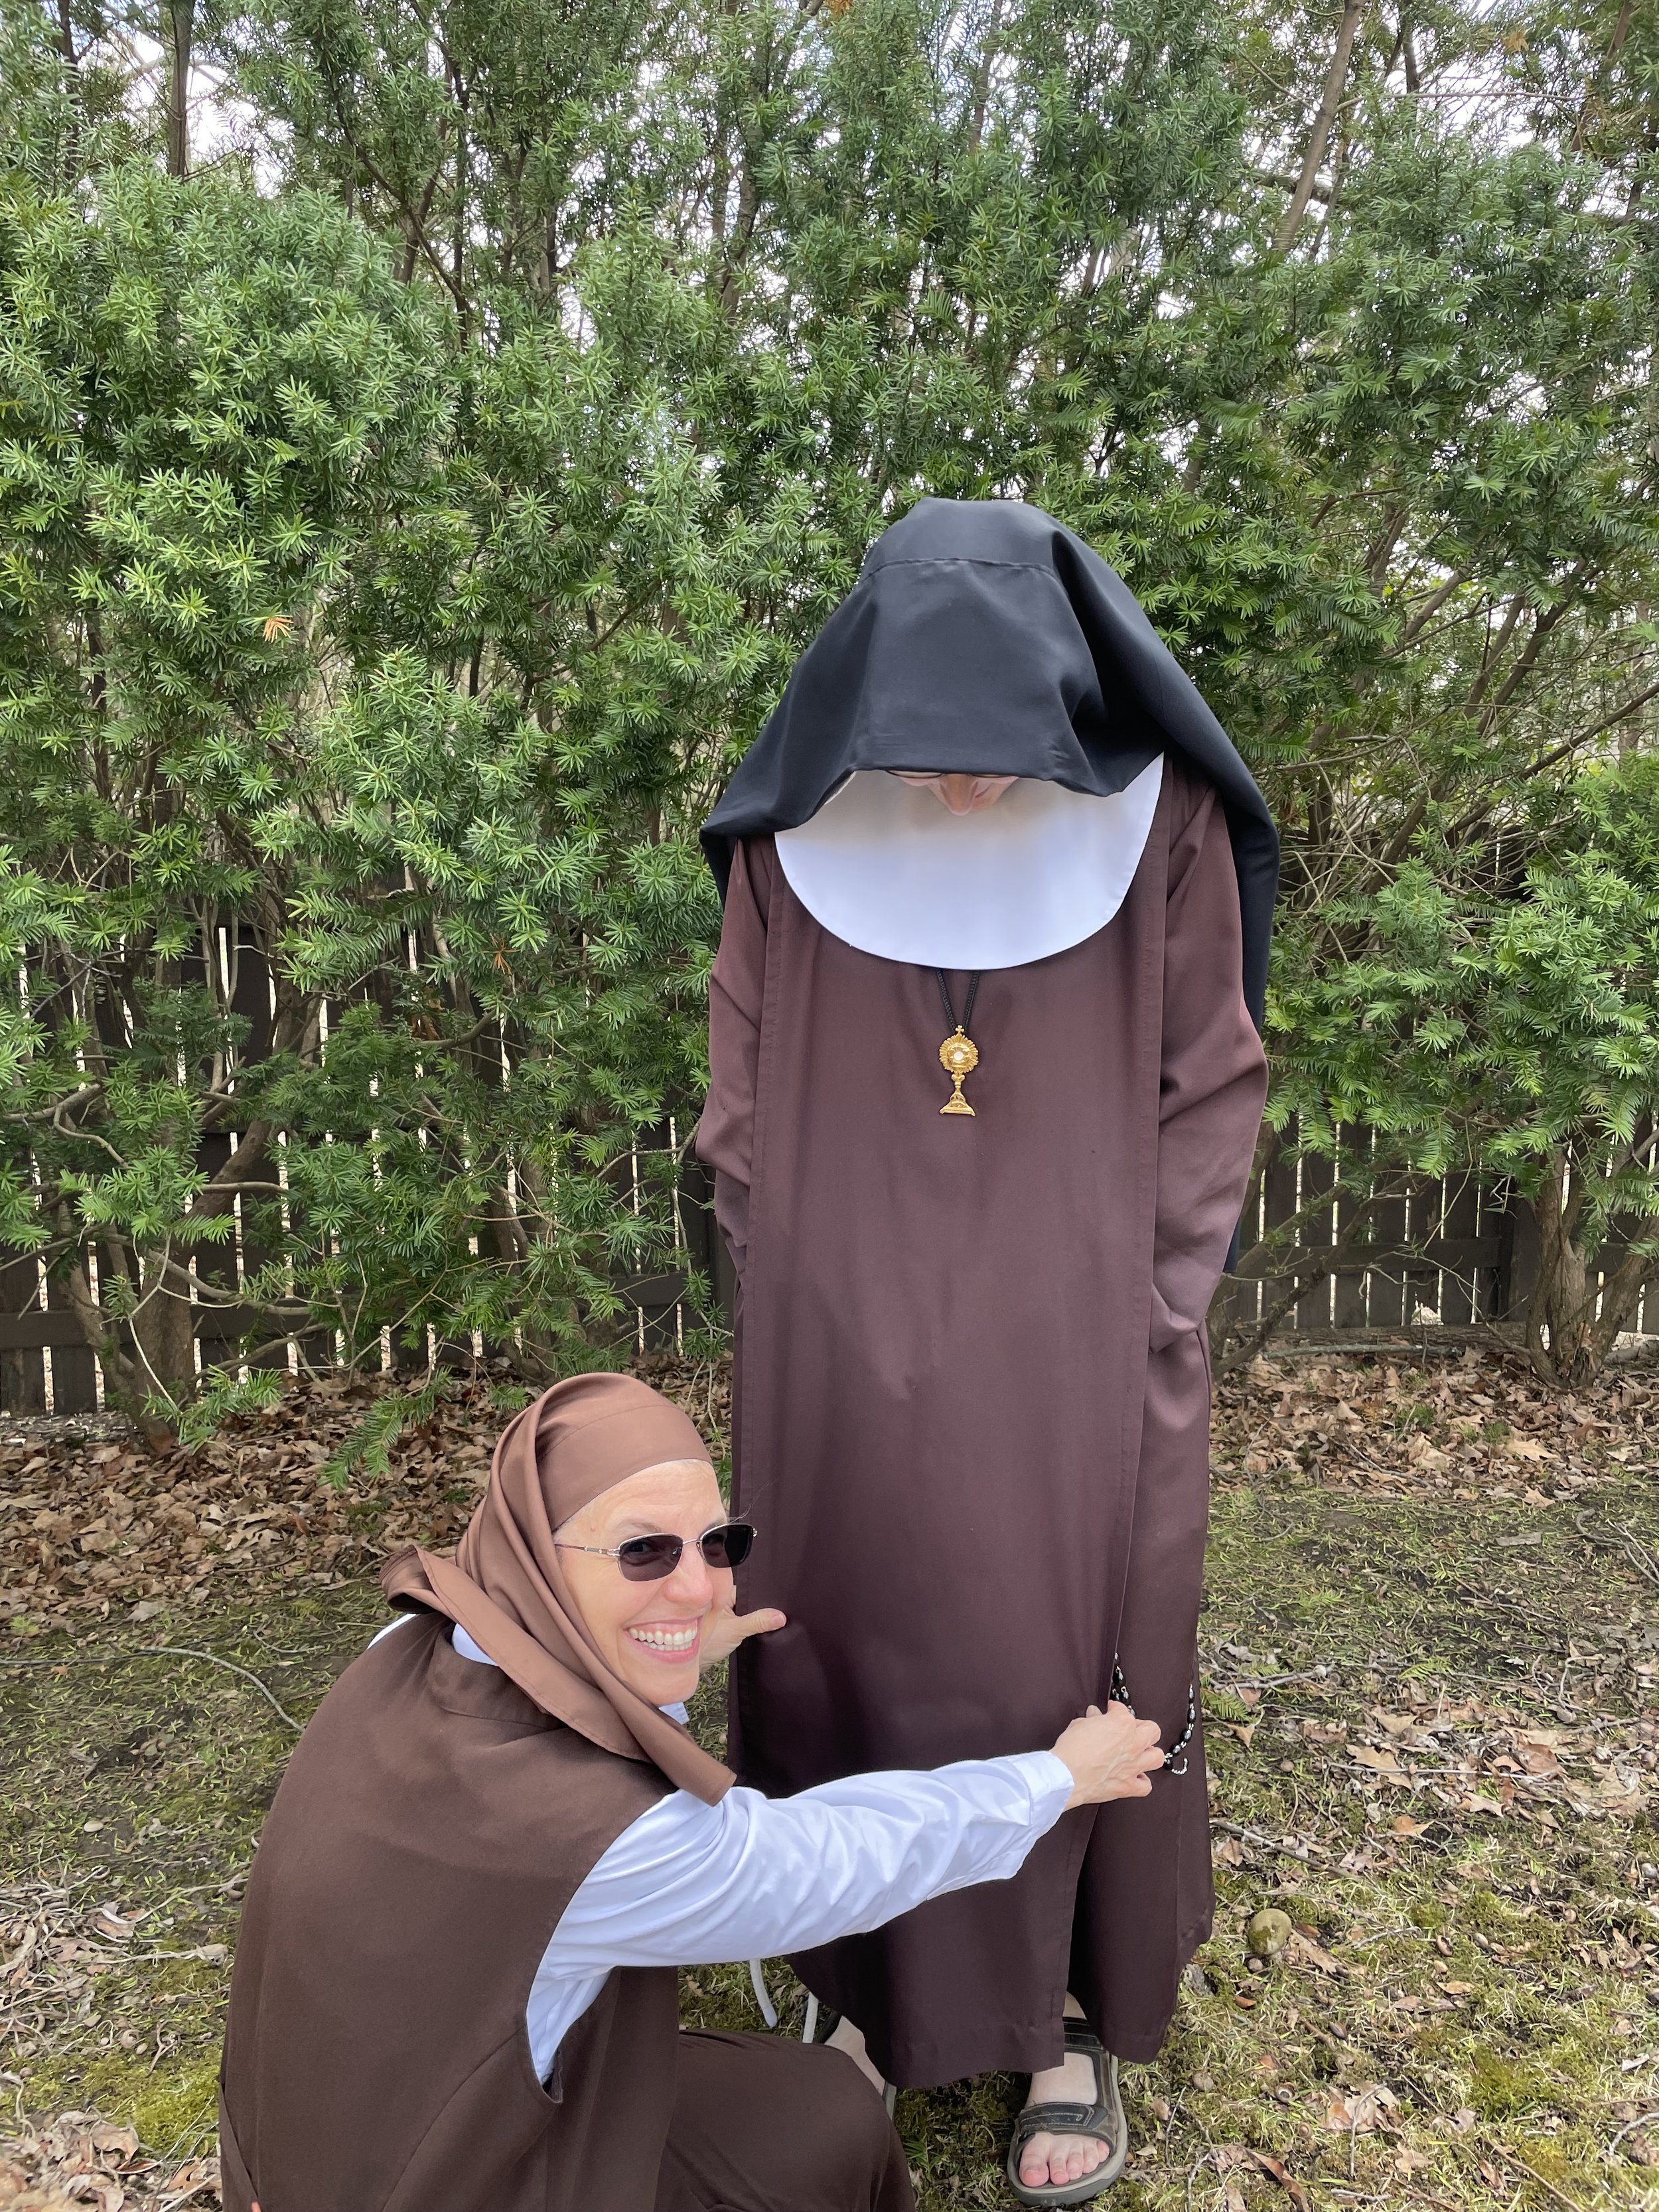 Even Nuns-to-be do silly things to get good pictures